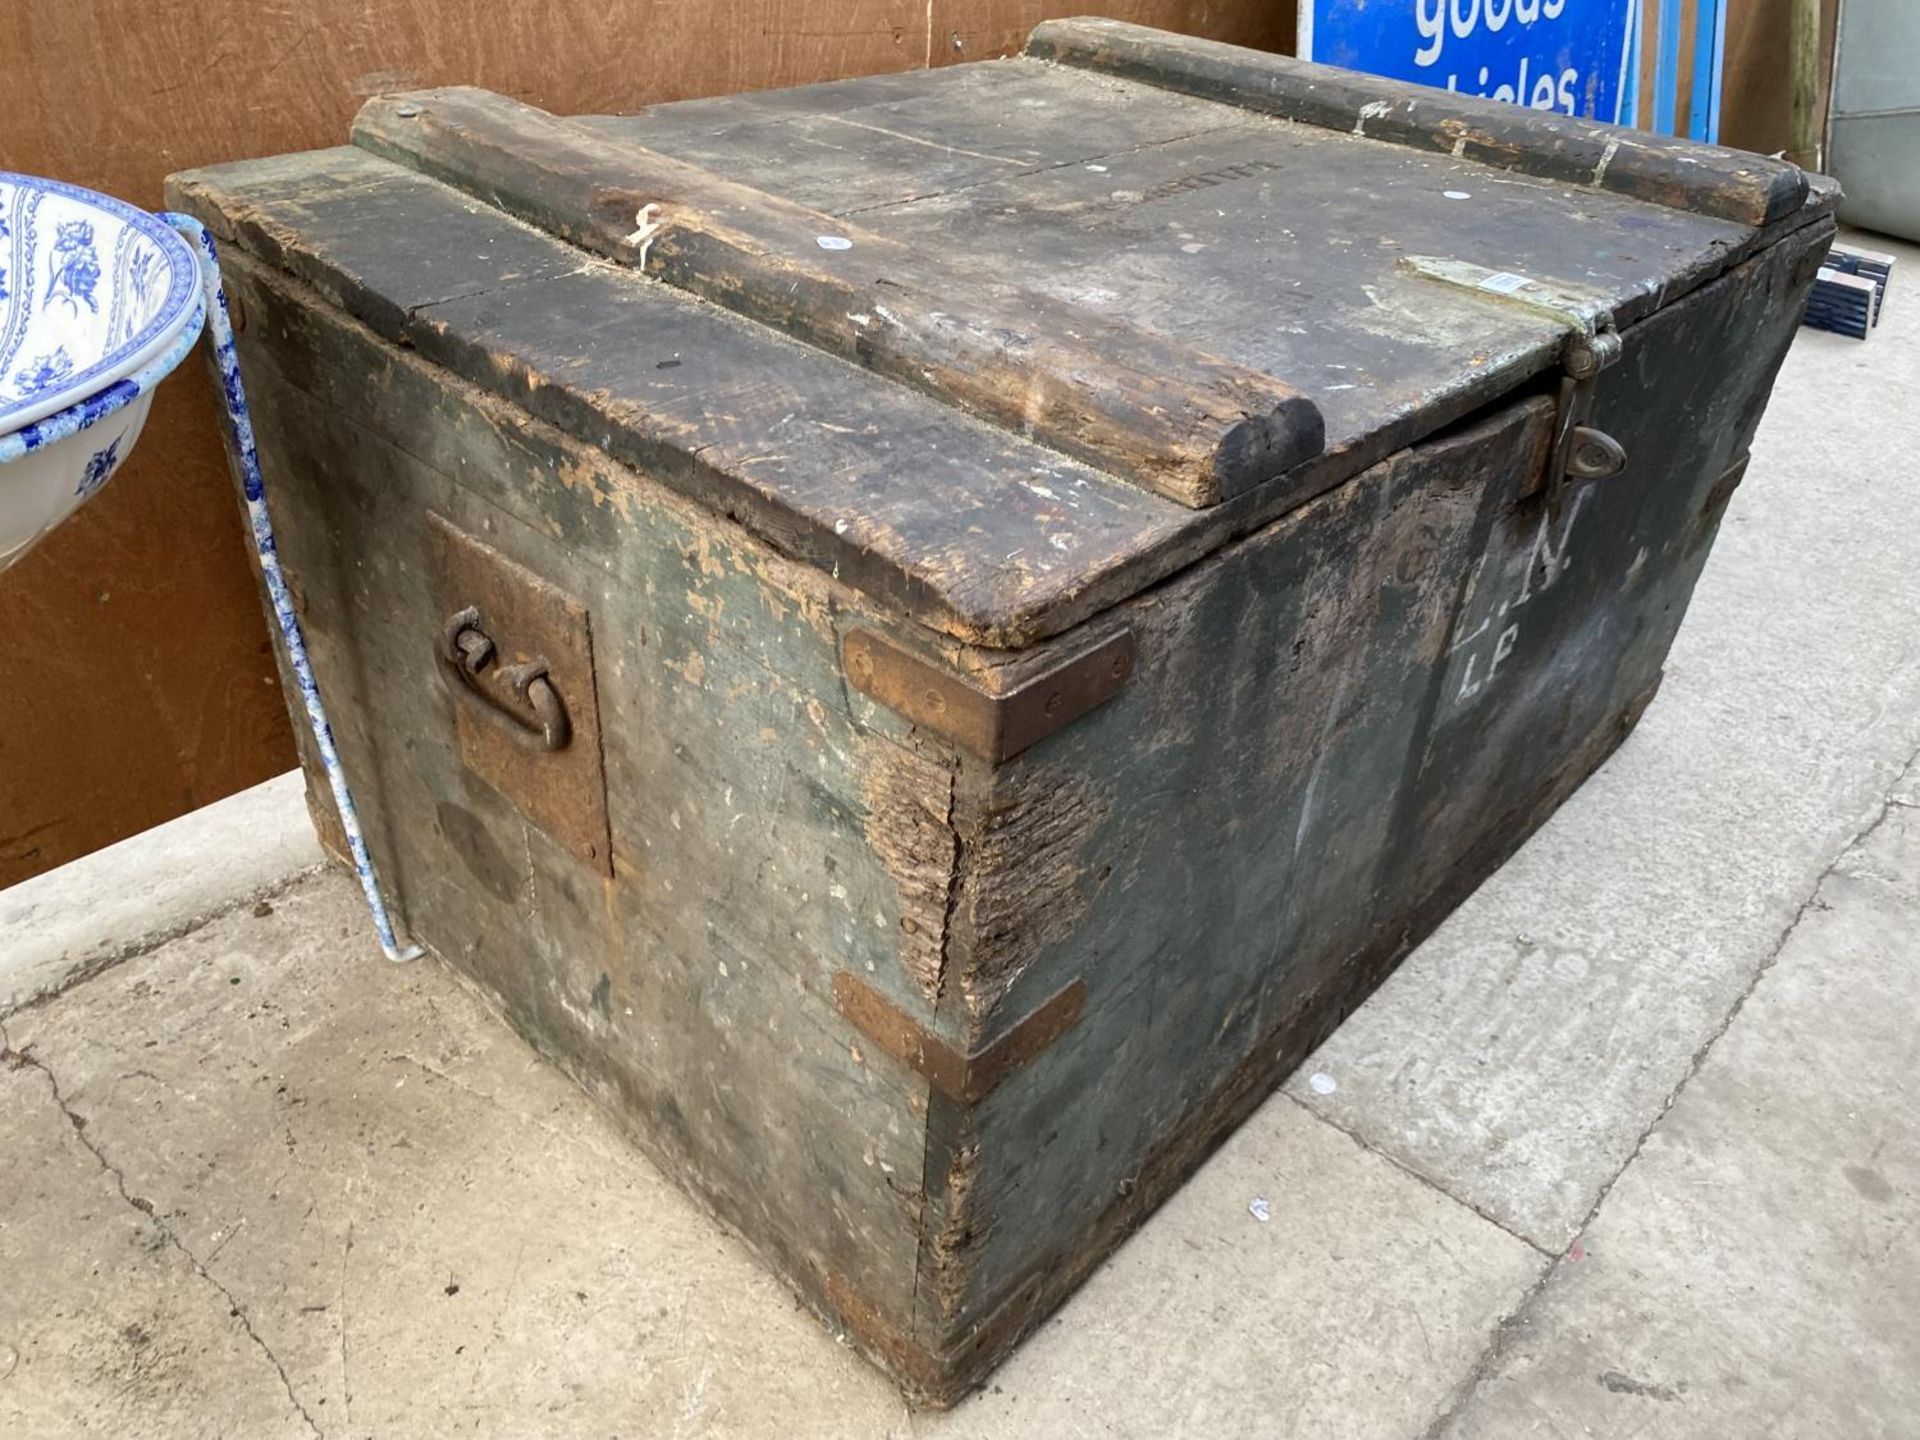 A LARGE VINTAGE WOODEN CHEST WITH METAL BANDING - Image 2 of 6